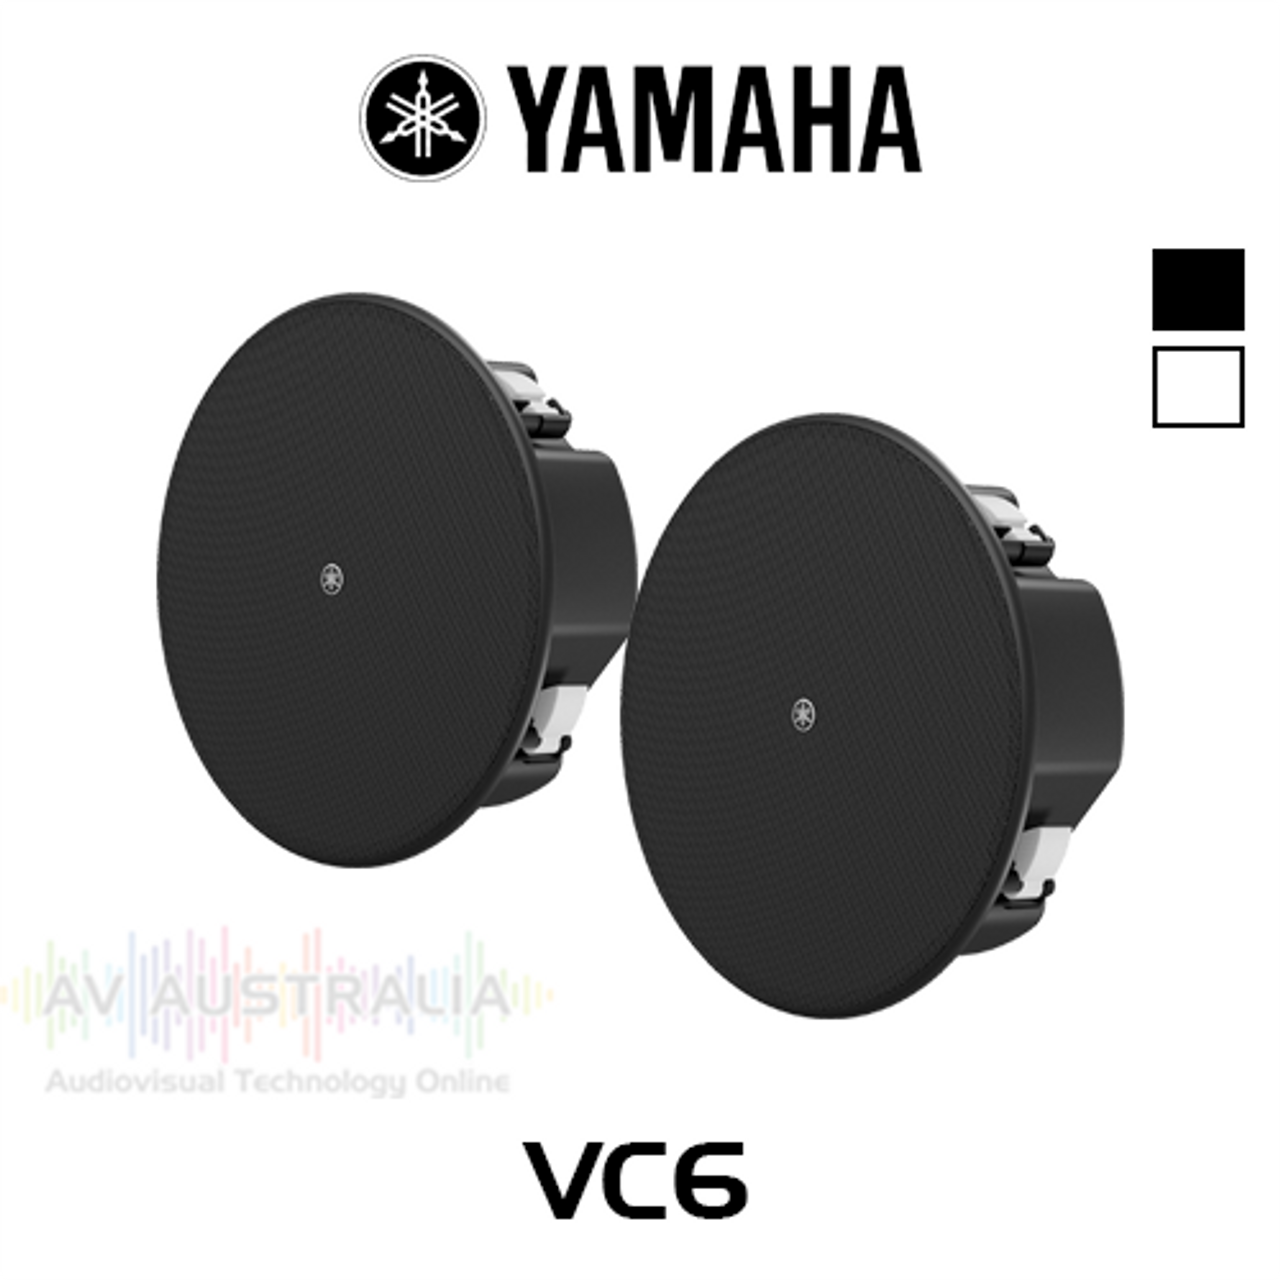 Yamaha VC6 6.5" 16 ohm 70/100V In-Ceiling Speakers (Pair)